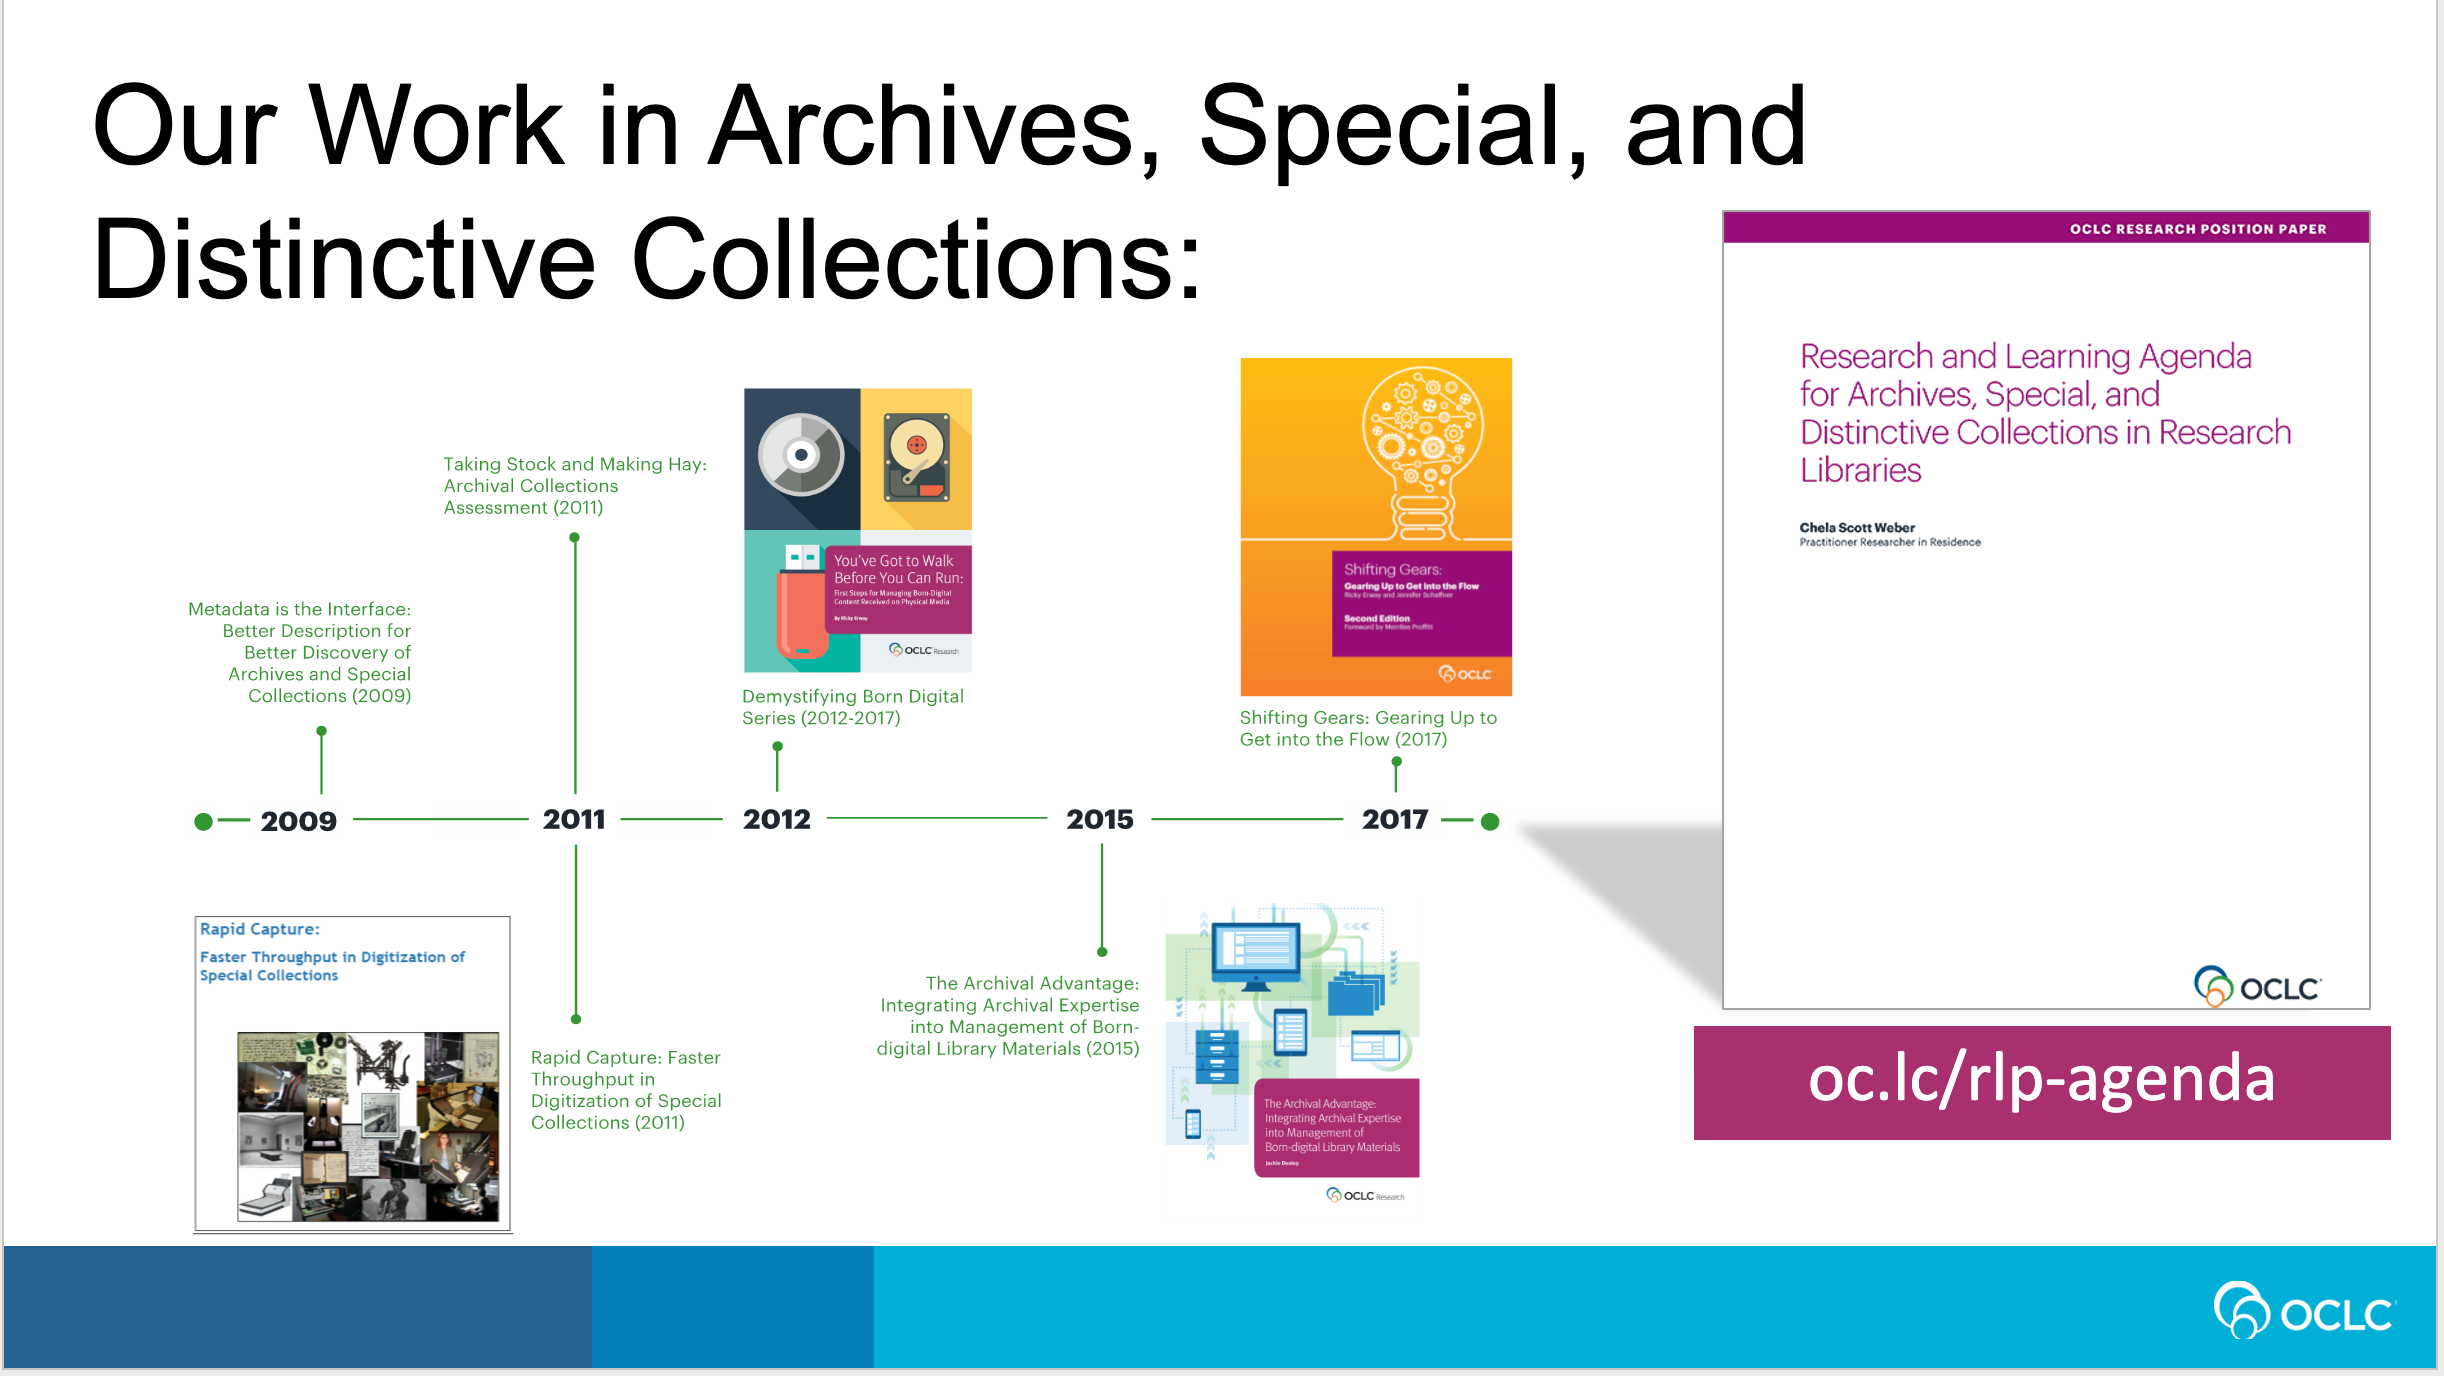 Lighting the Way-- Improving discovery and delivery for archives and special collections